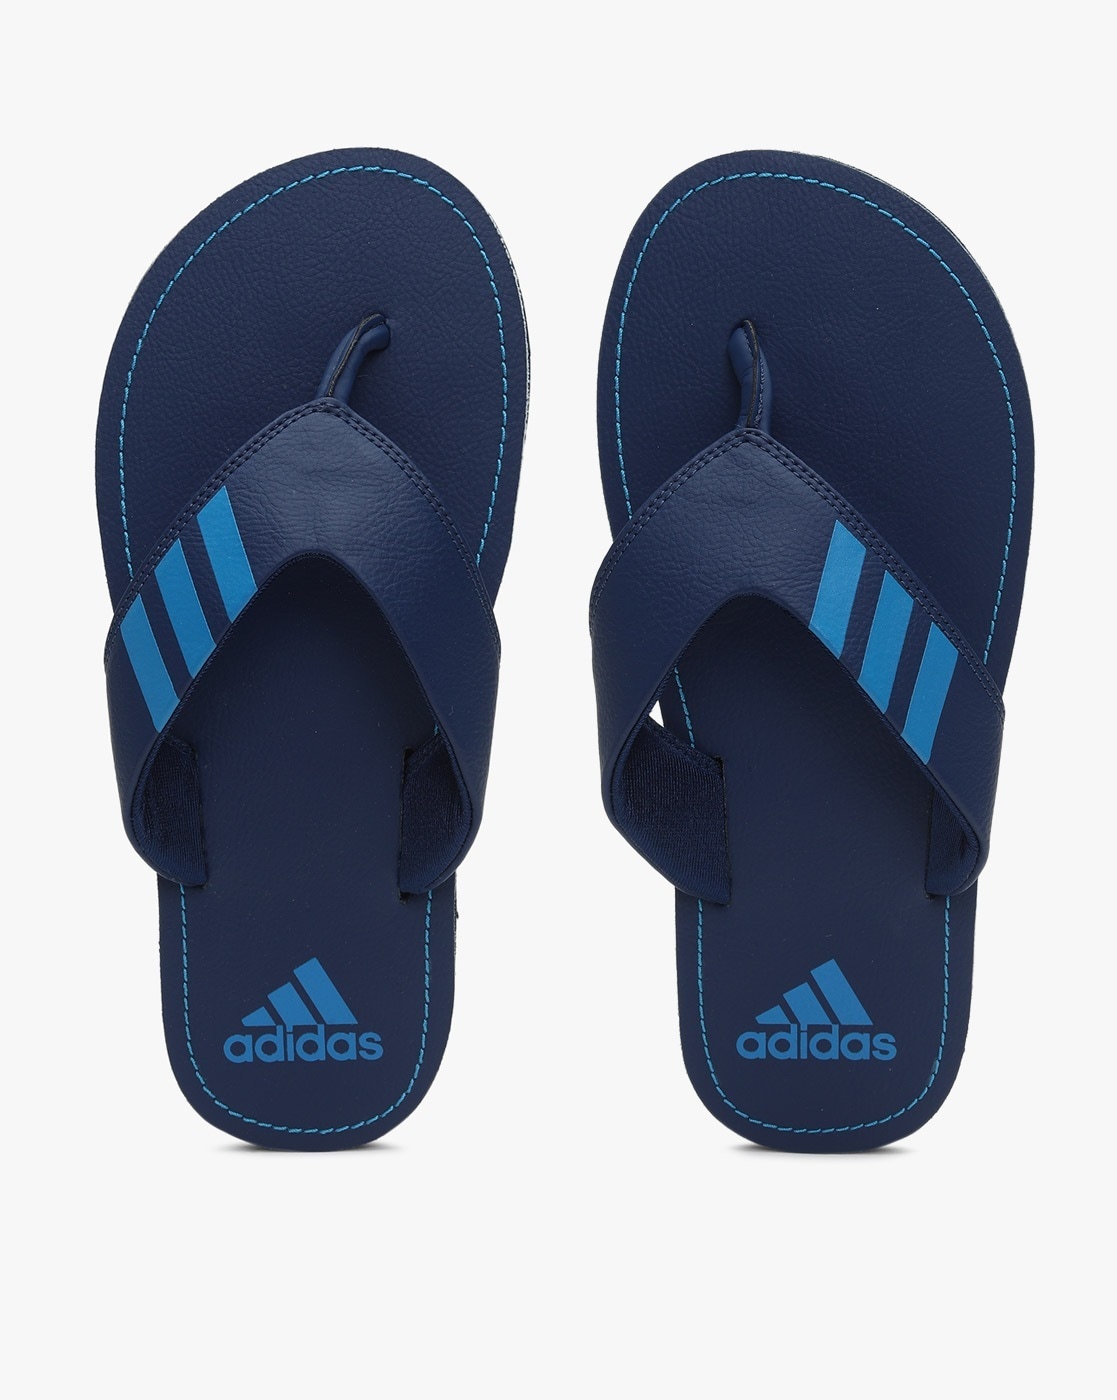 Share 64+ adidas new slippers 2018 super hot